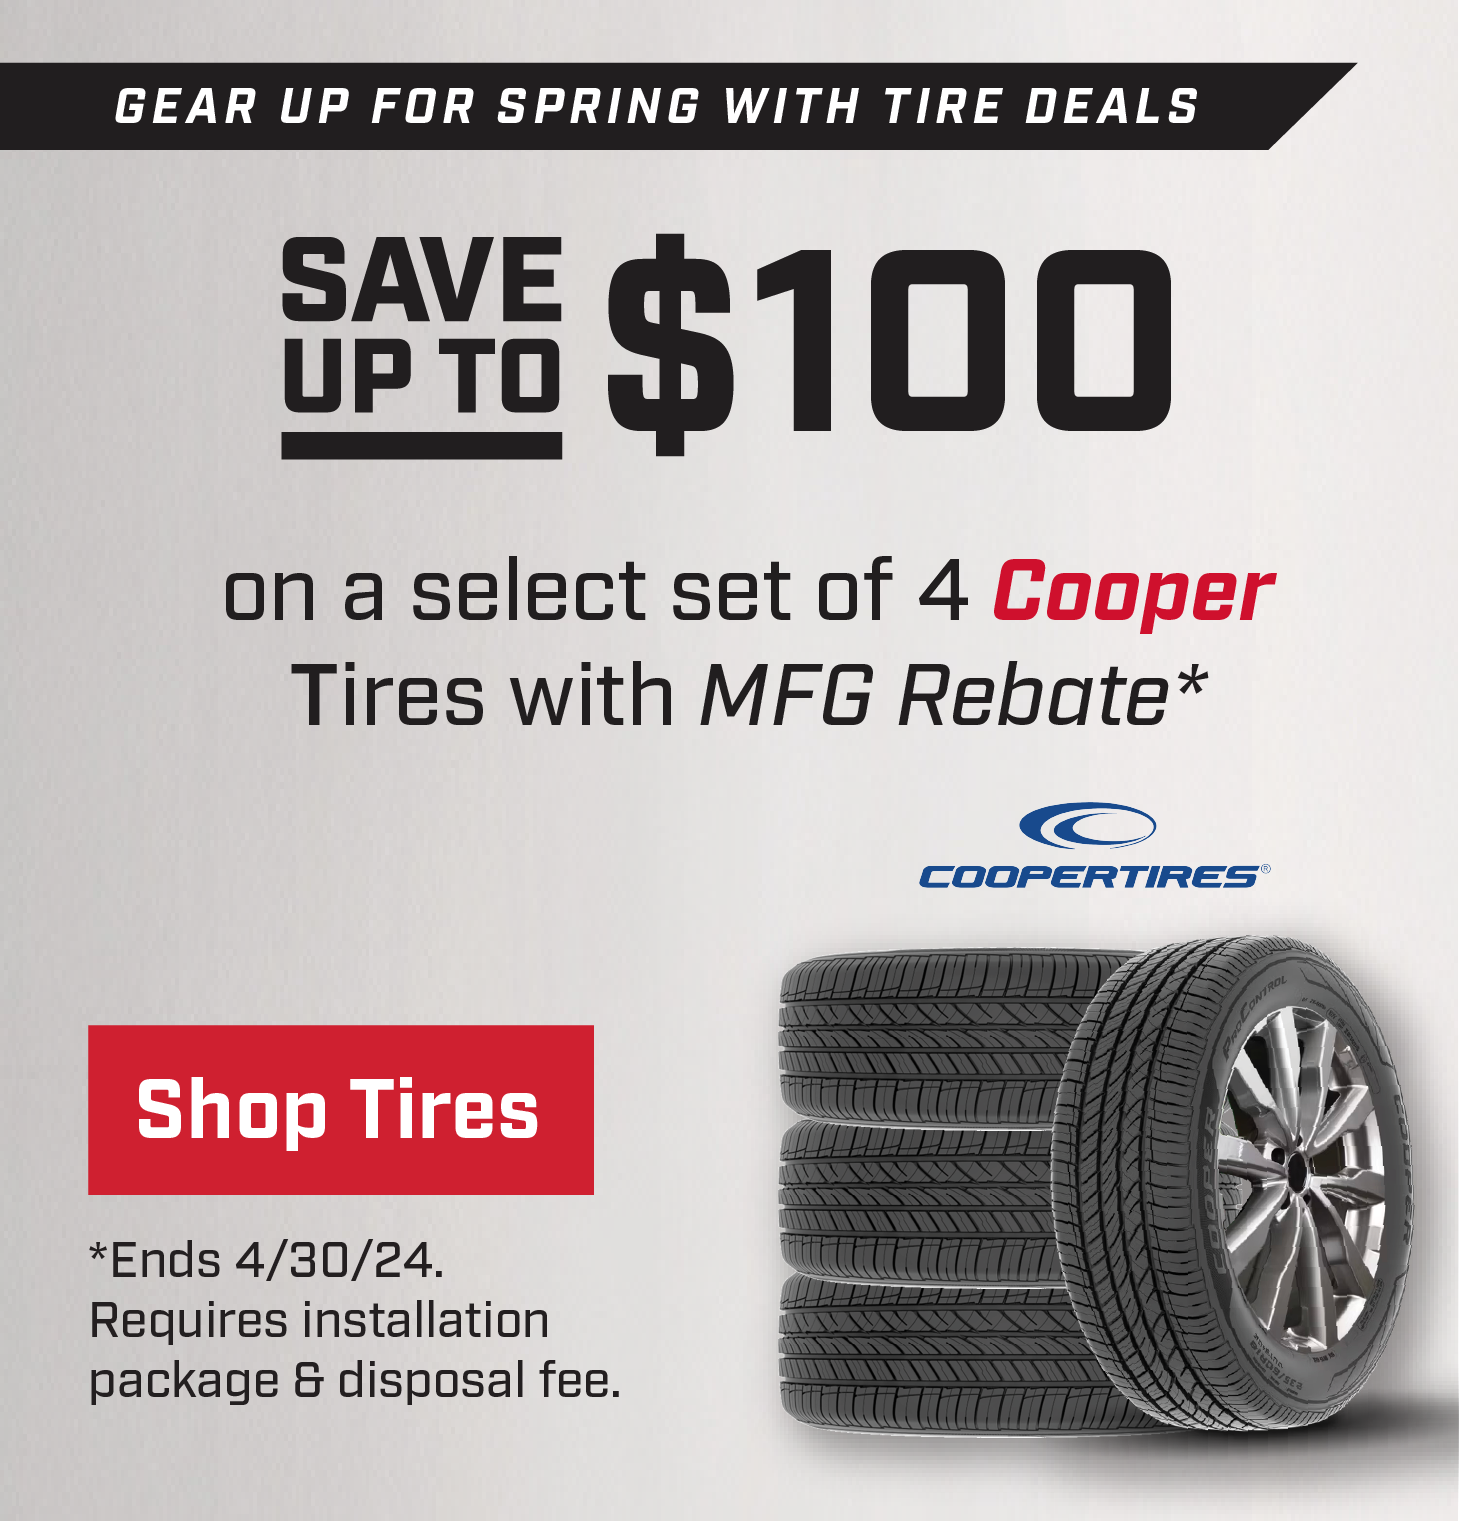 Save On Goodyear Tires